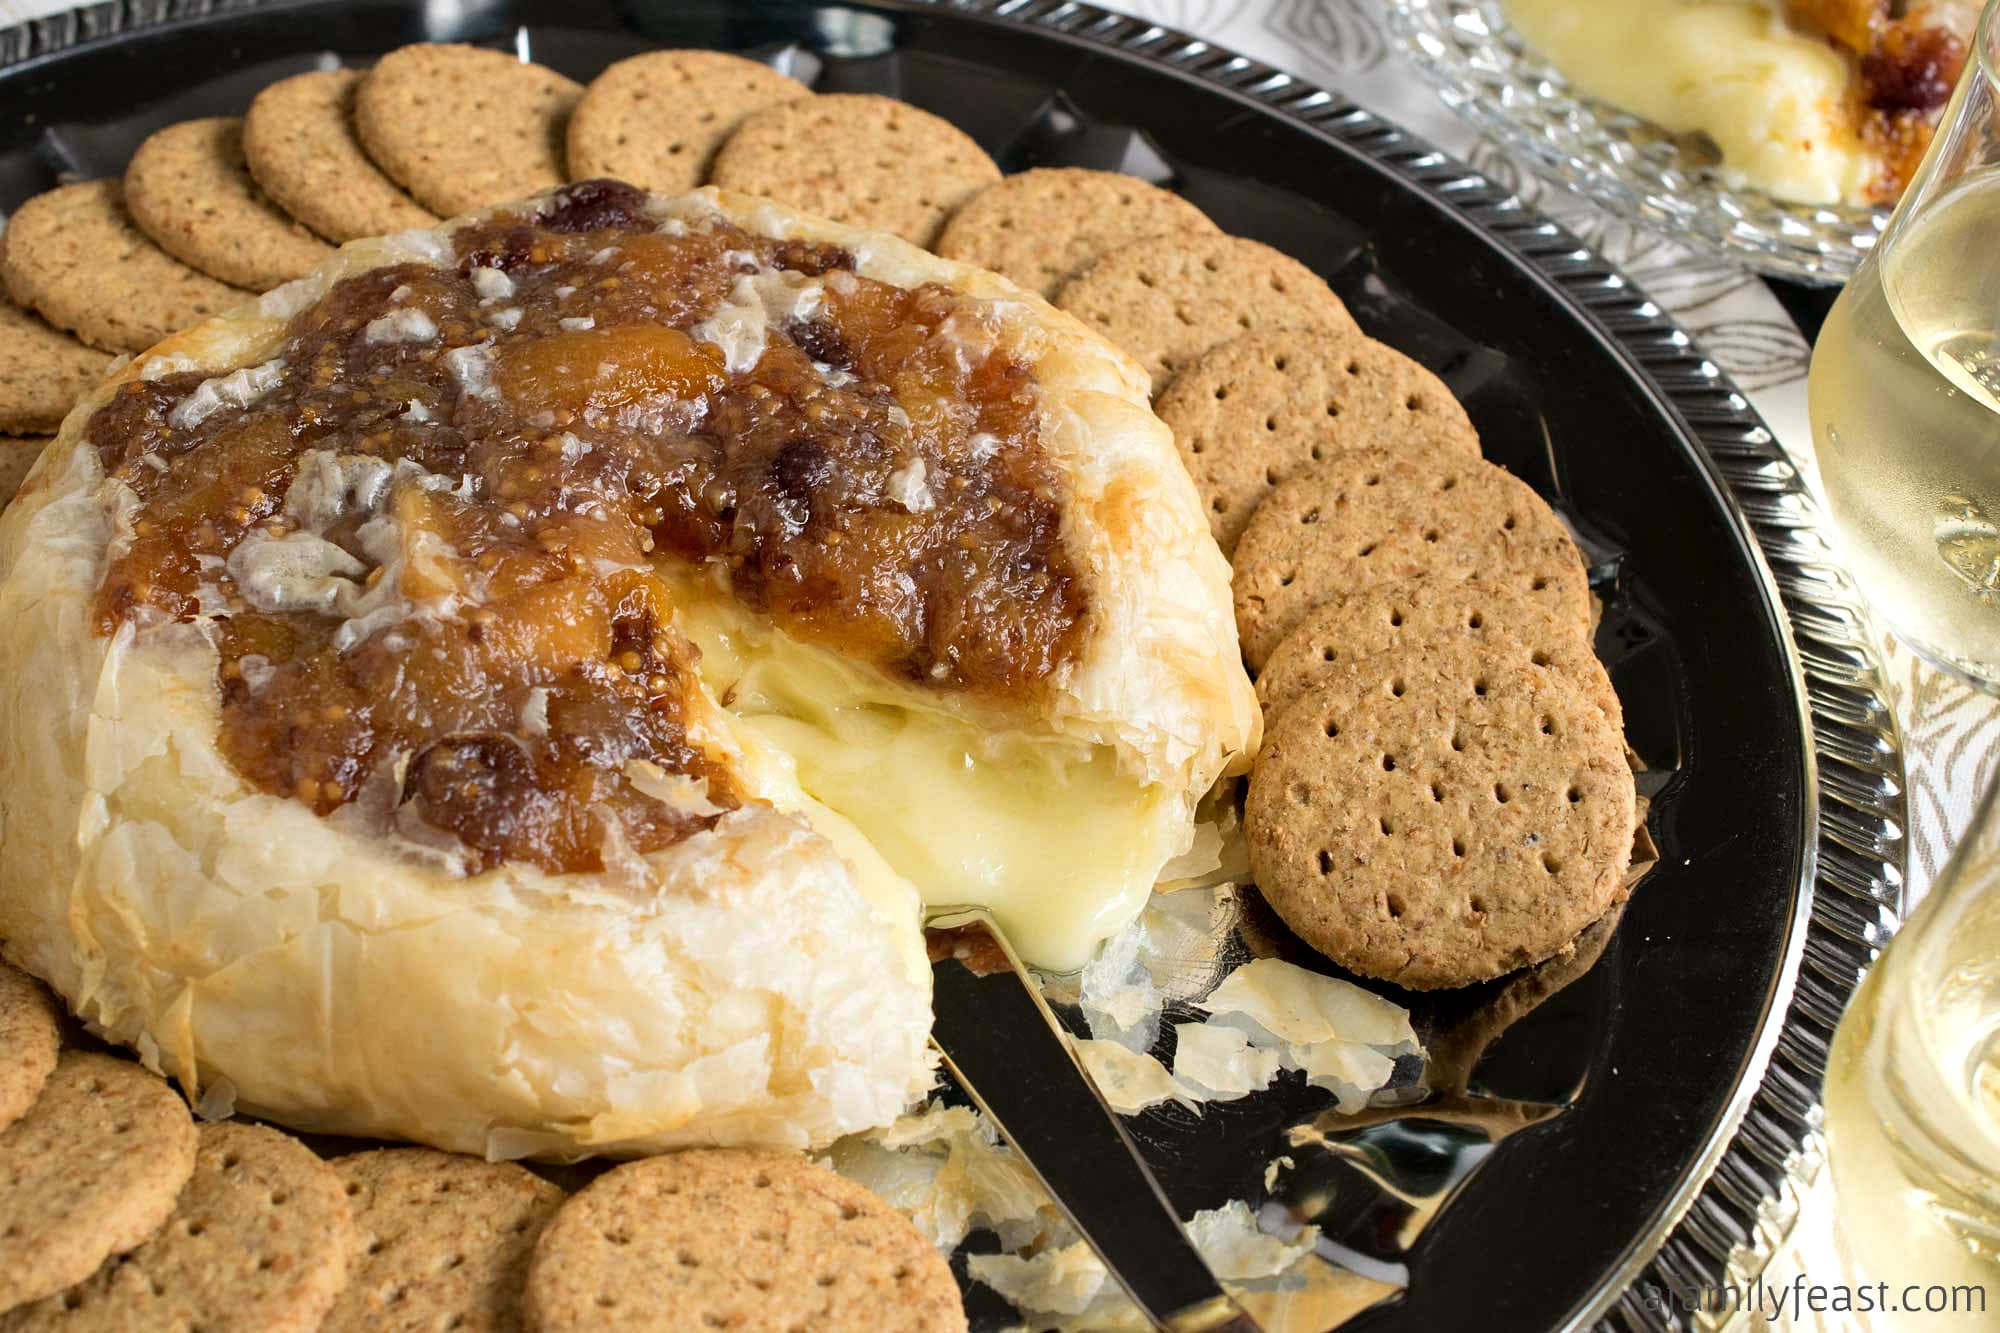 Warm and melty Baked Brie with Mostarda. 